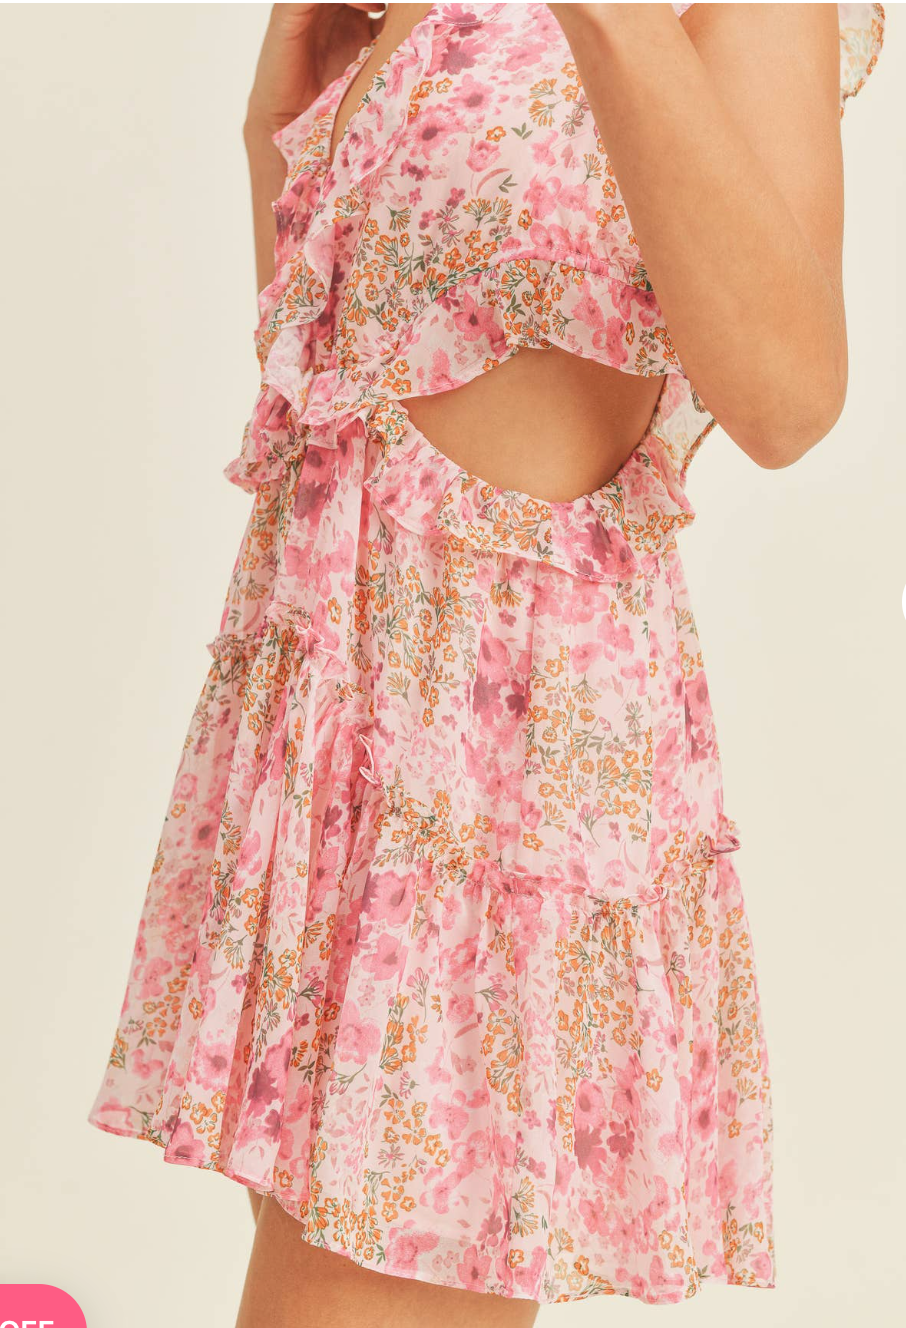 Reset By Jane Pink Floral Rosie Cut Out Dress